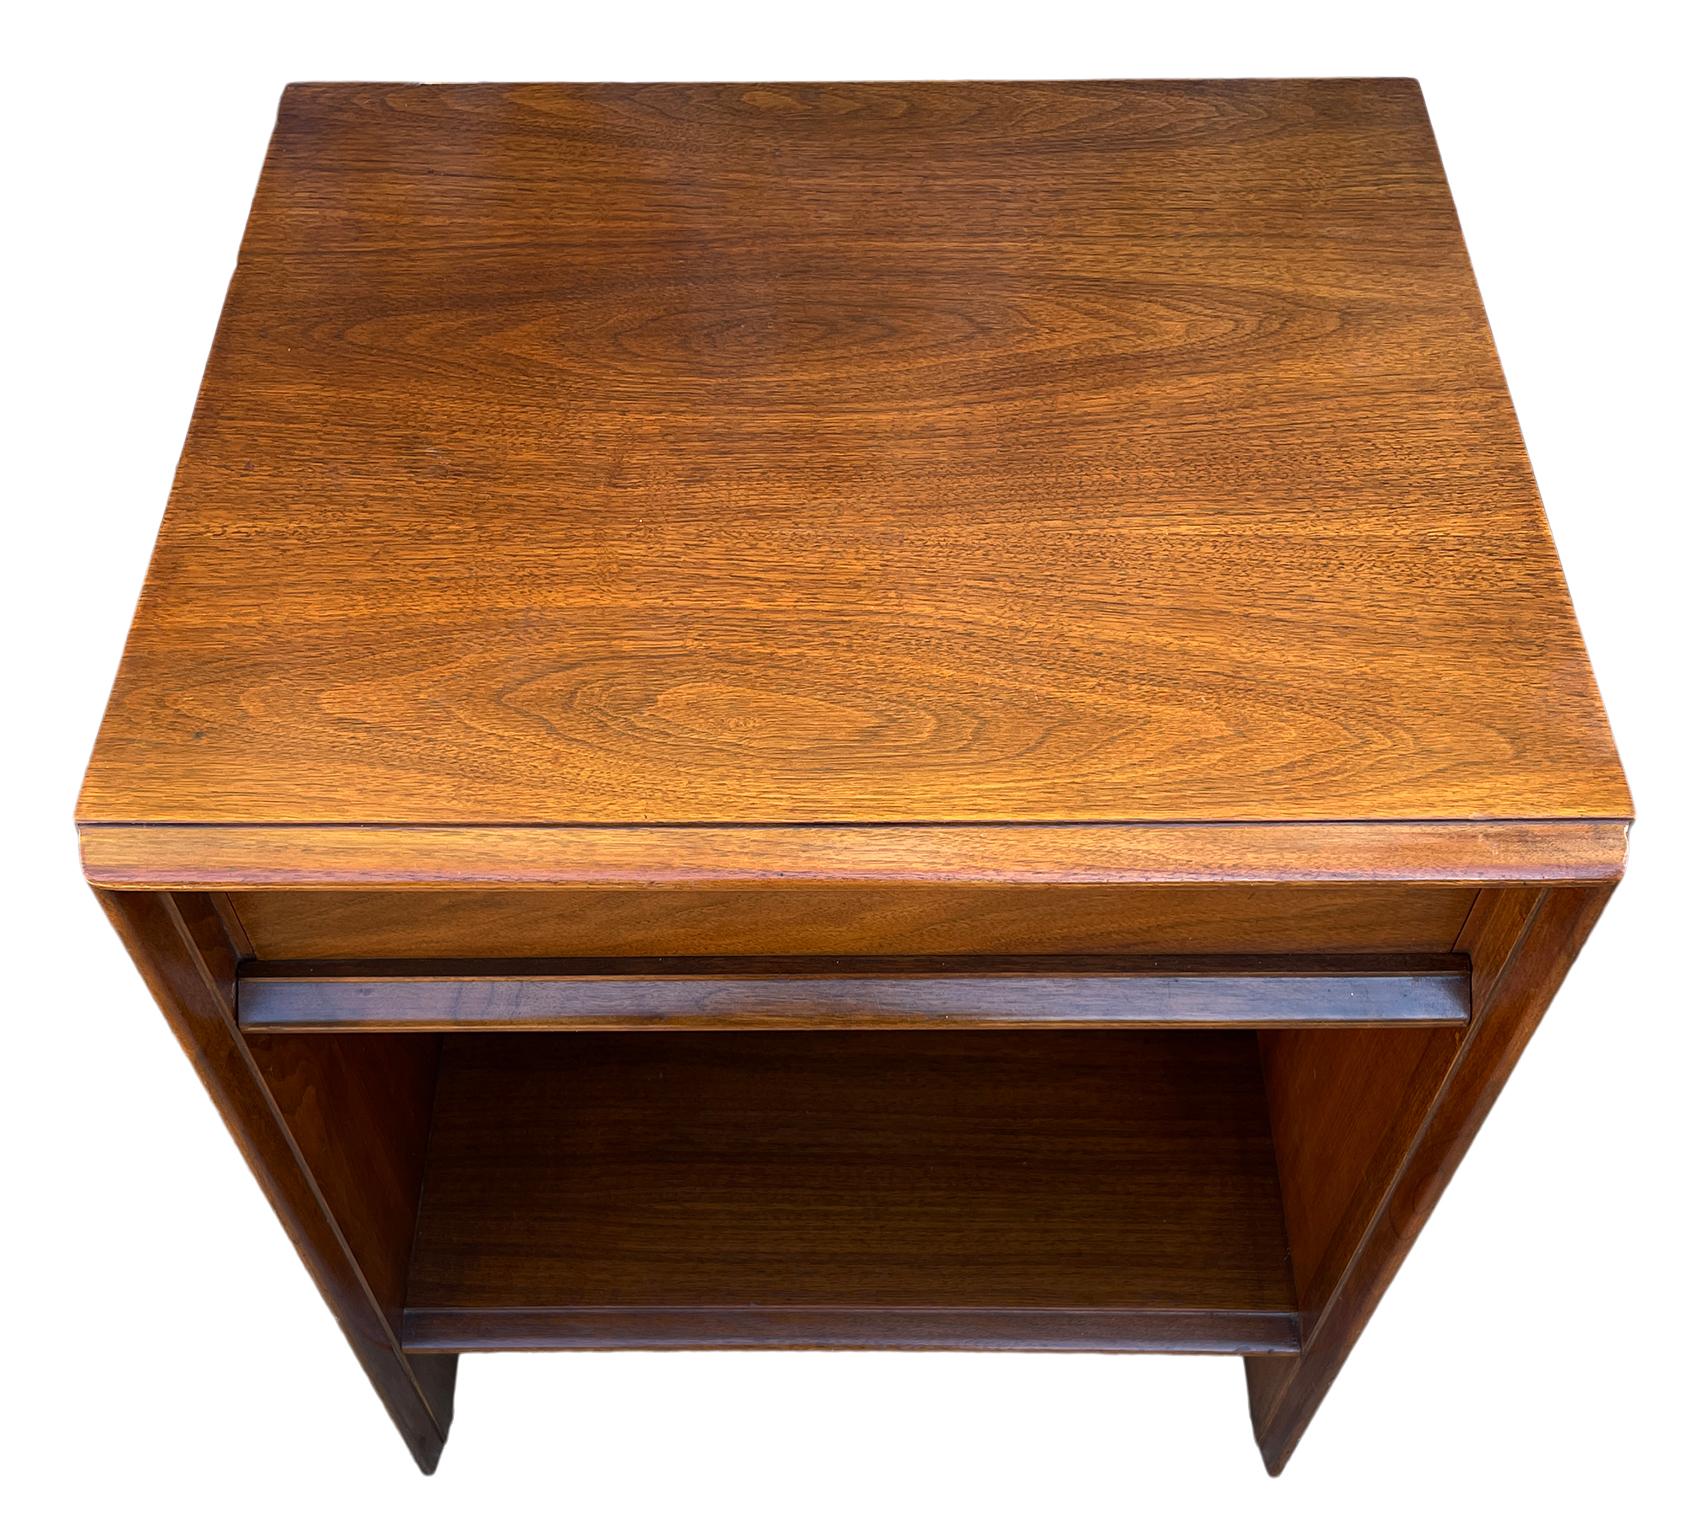 Beautiful Walnut single drawer nightstand by T.H. Robsjohn-Gibbings for Widdicomb - Great vintage condition - Shows little signs of use. Cloth Label Widdicomb inside top drawer. Located in Brooklyn NYC.

Measures: 21